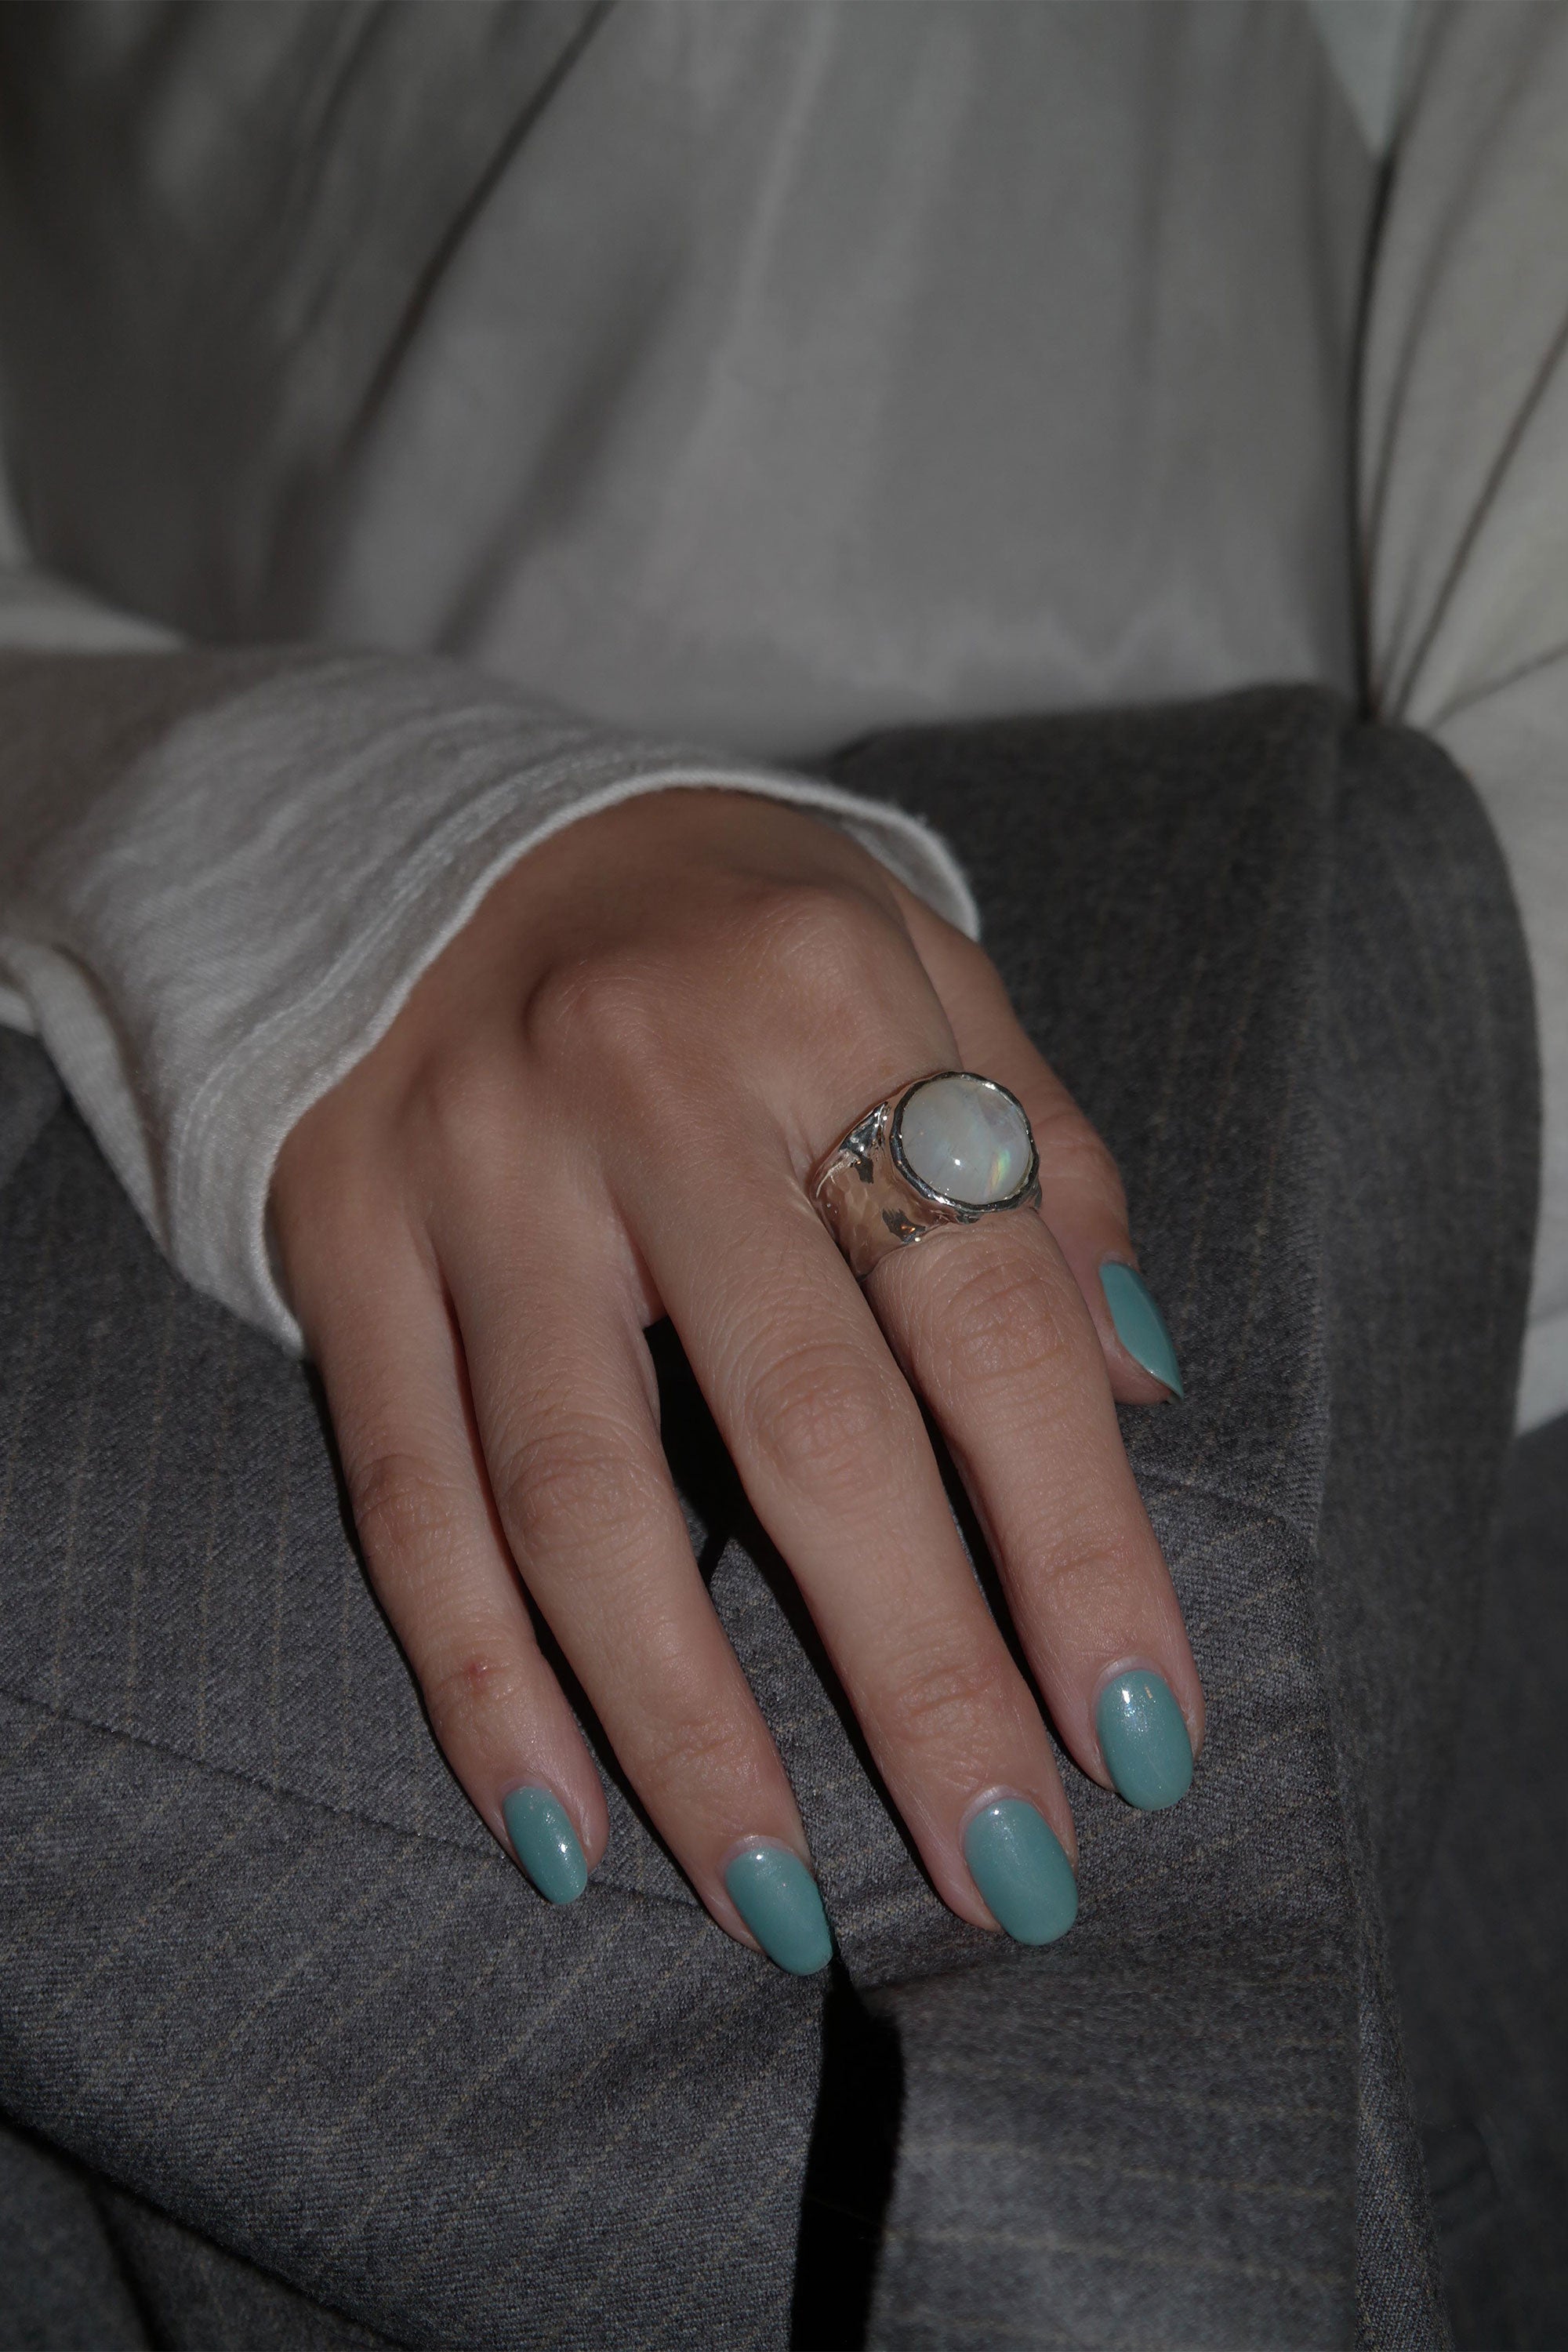 SOUHAIT SUMMER, NIGHT AND DREAM SUMMER MOON RING